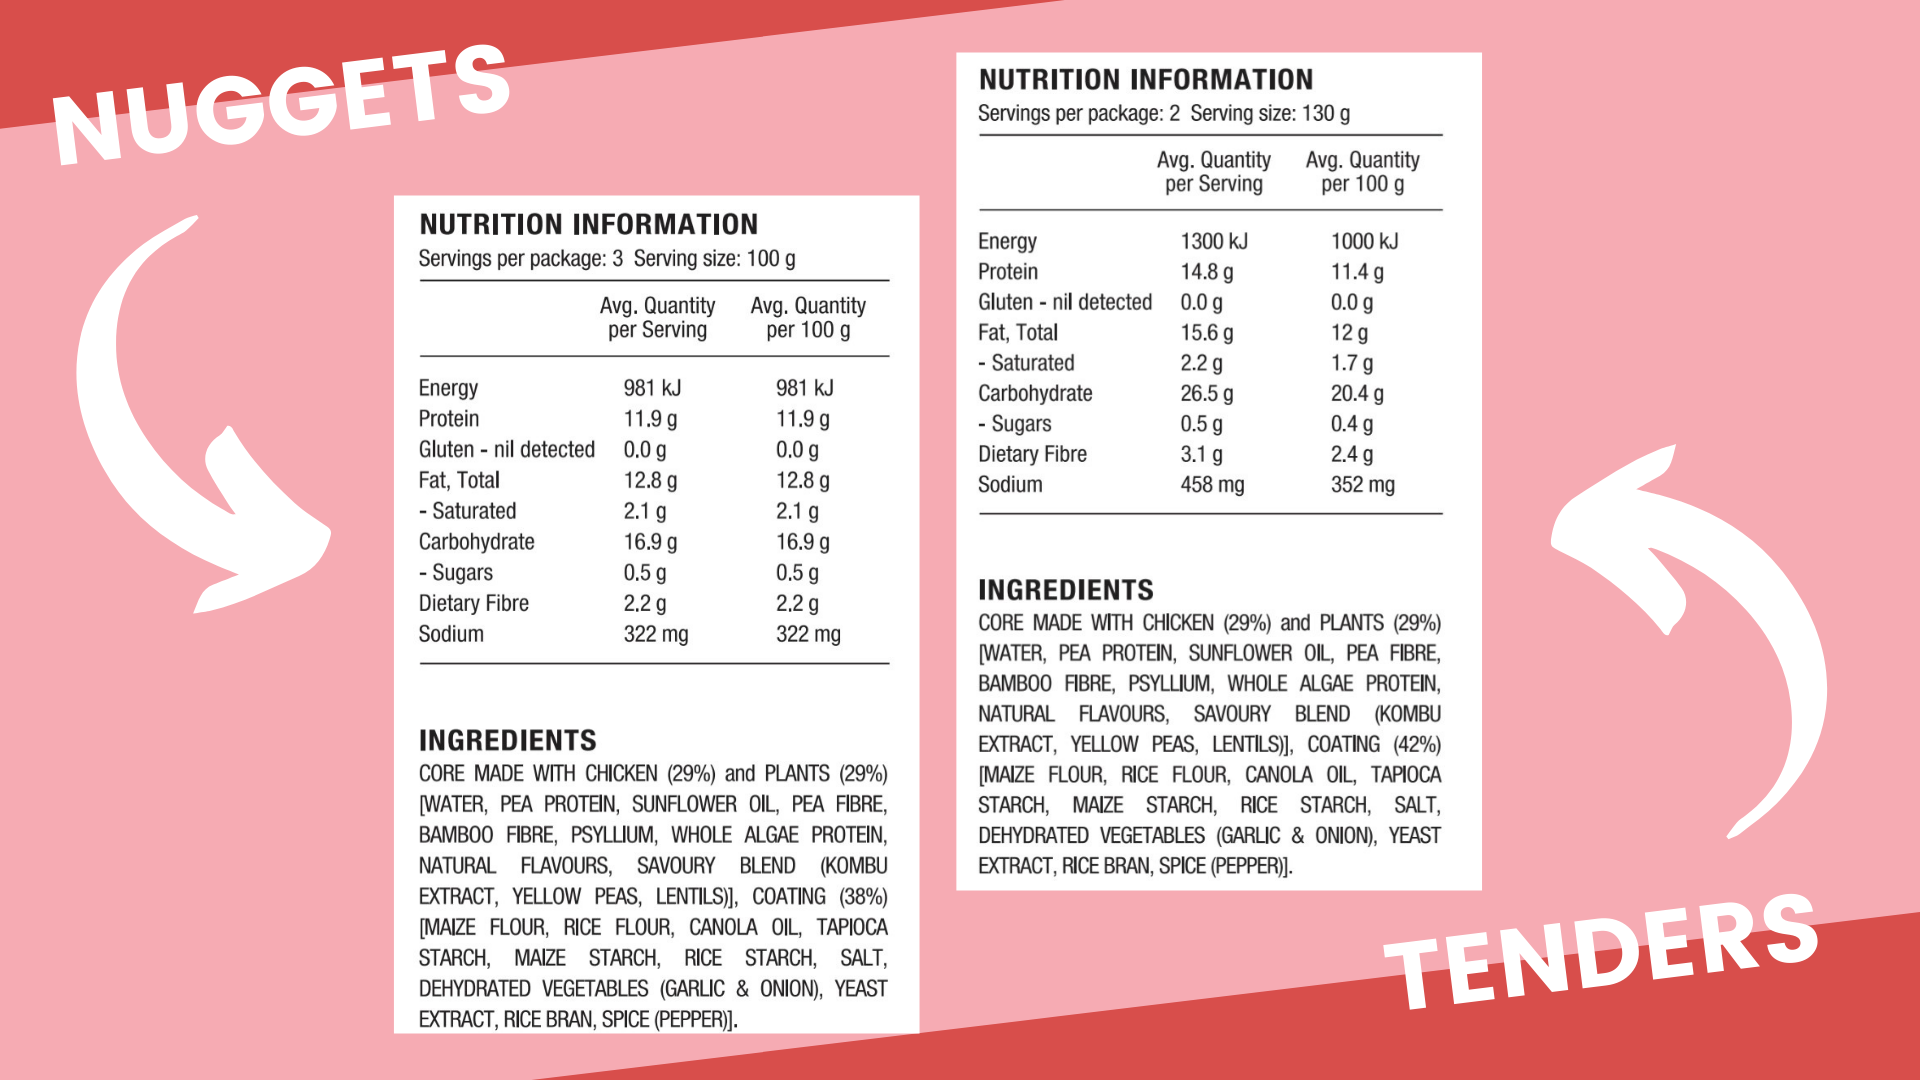 Nutritional Panels